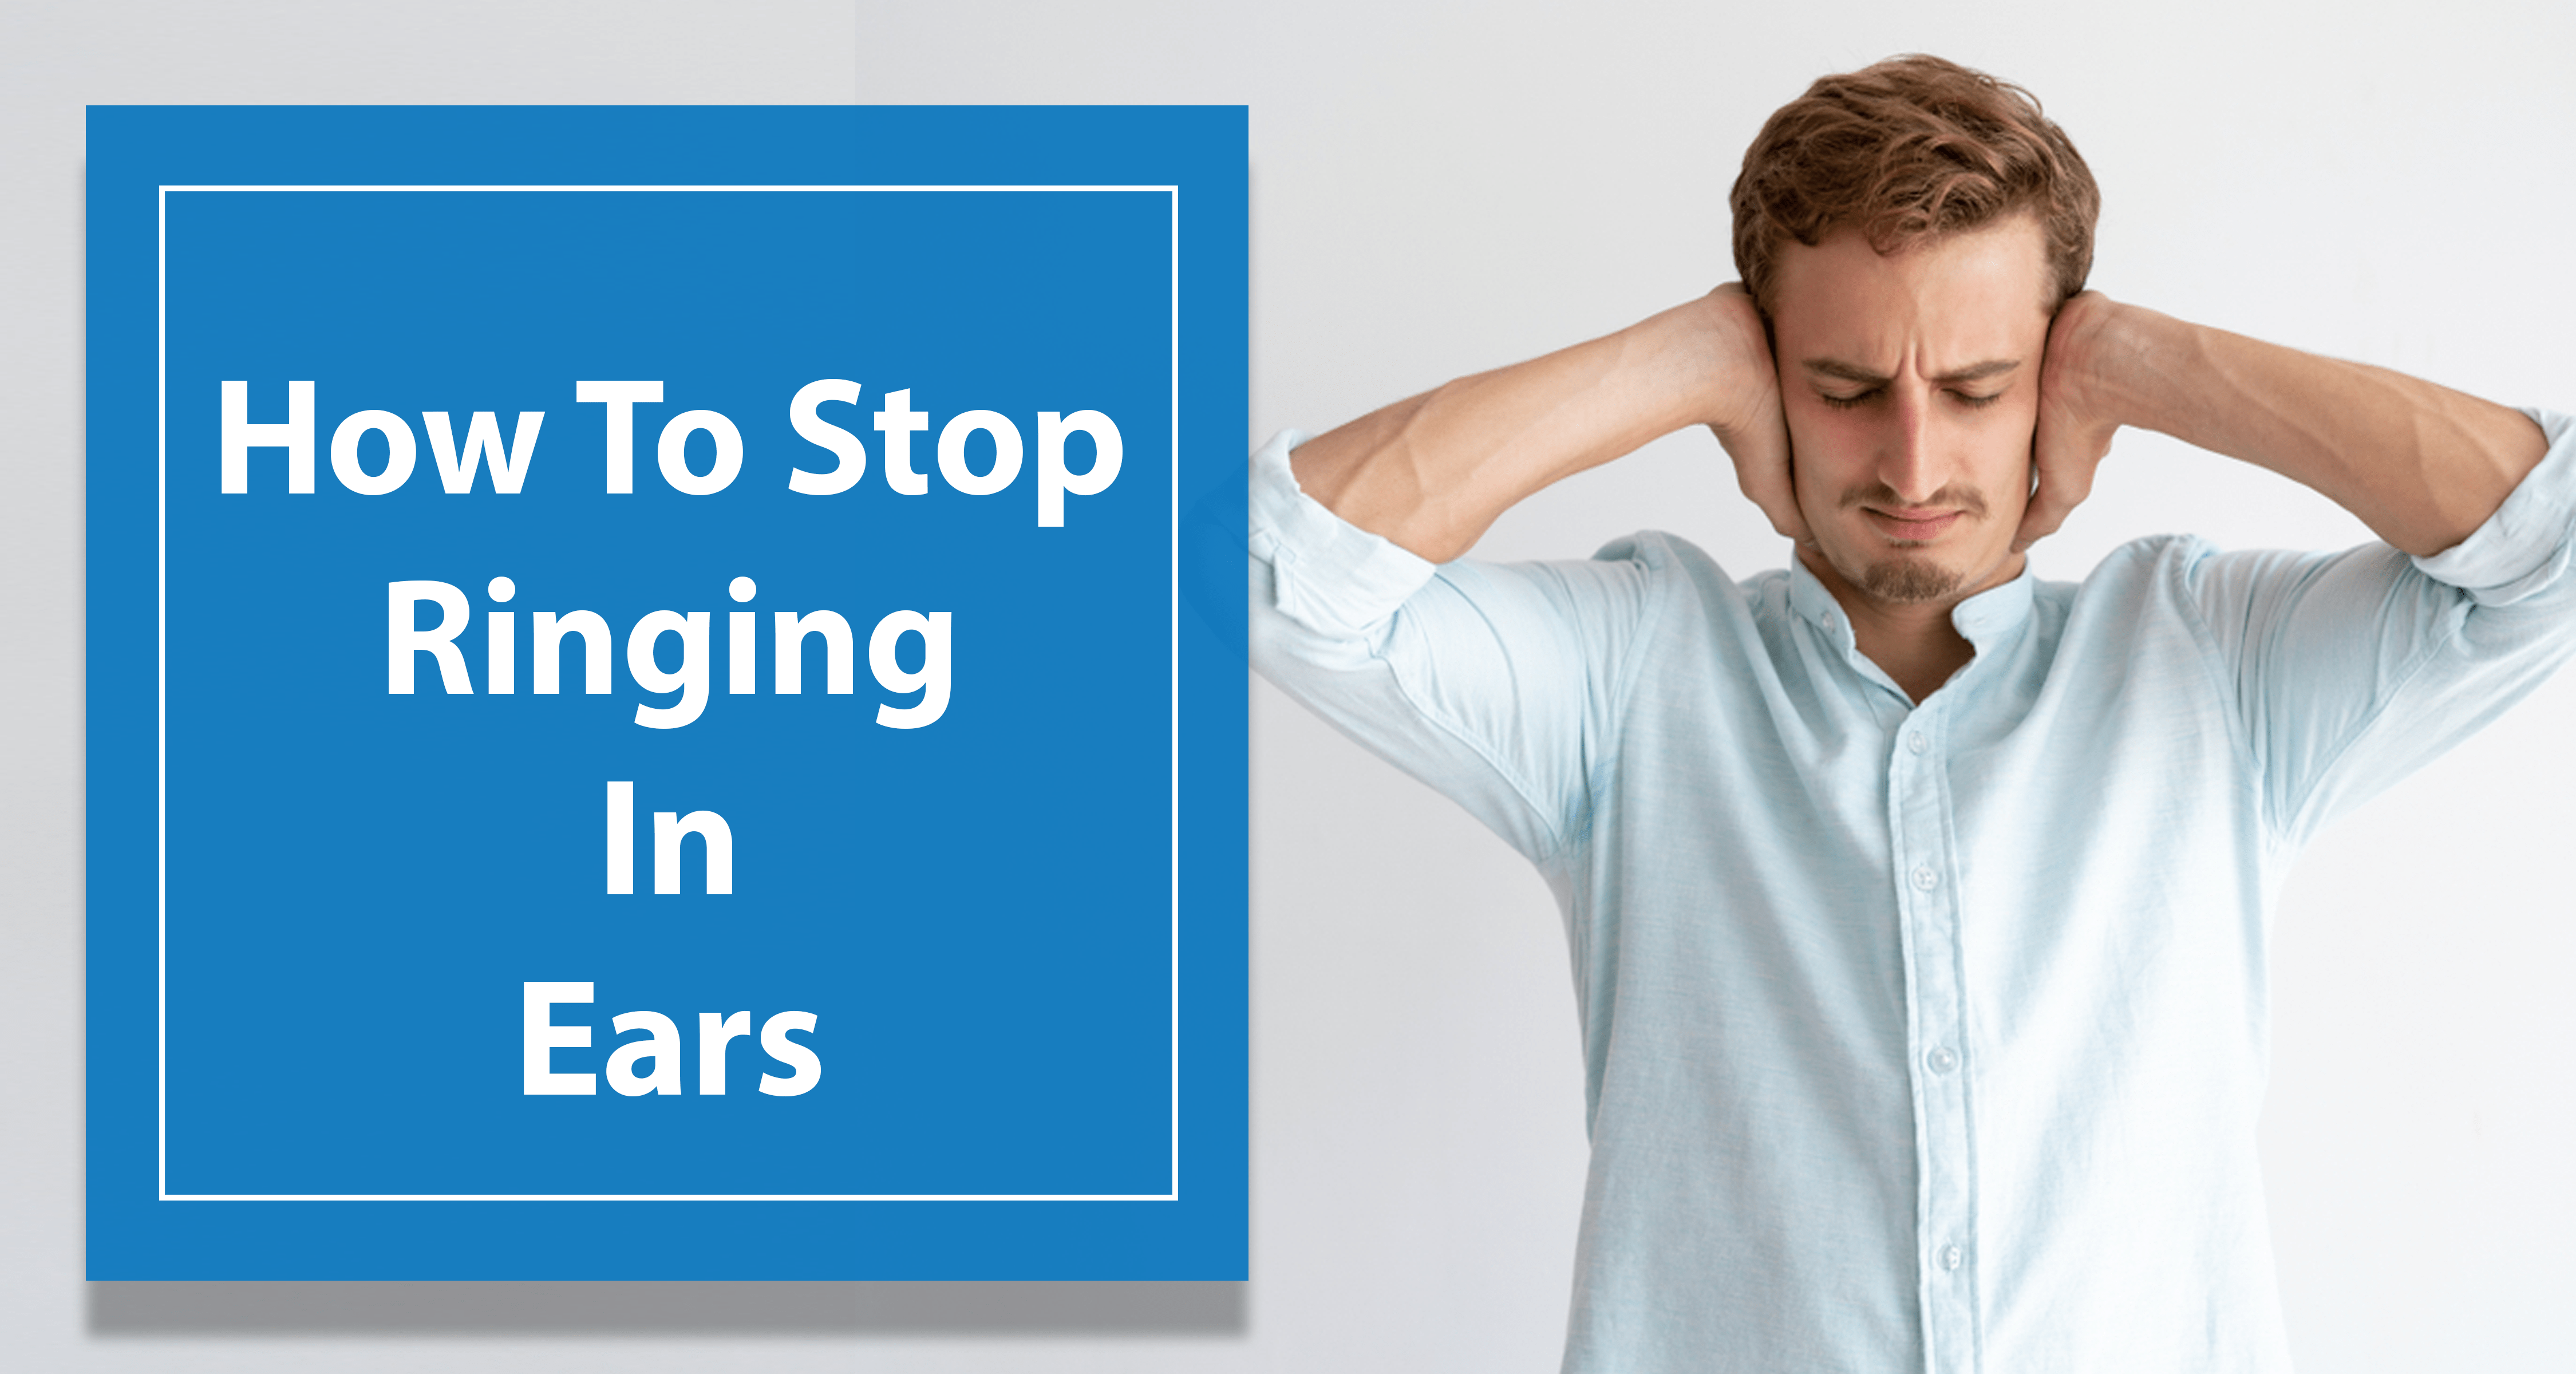 How To Stop Ringing In Ears Using Simple Home Remedies?